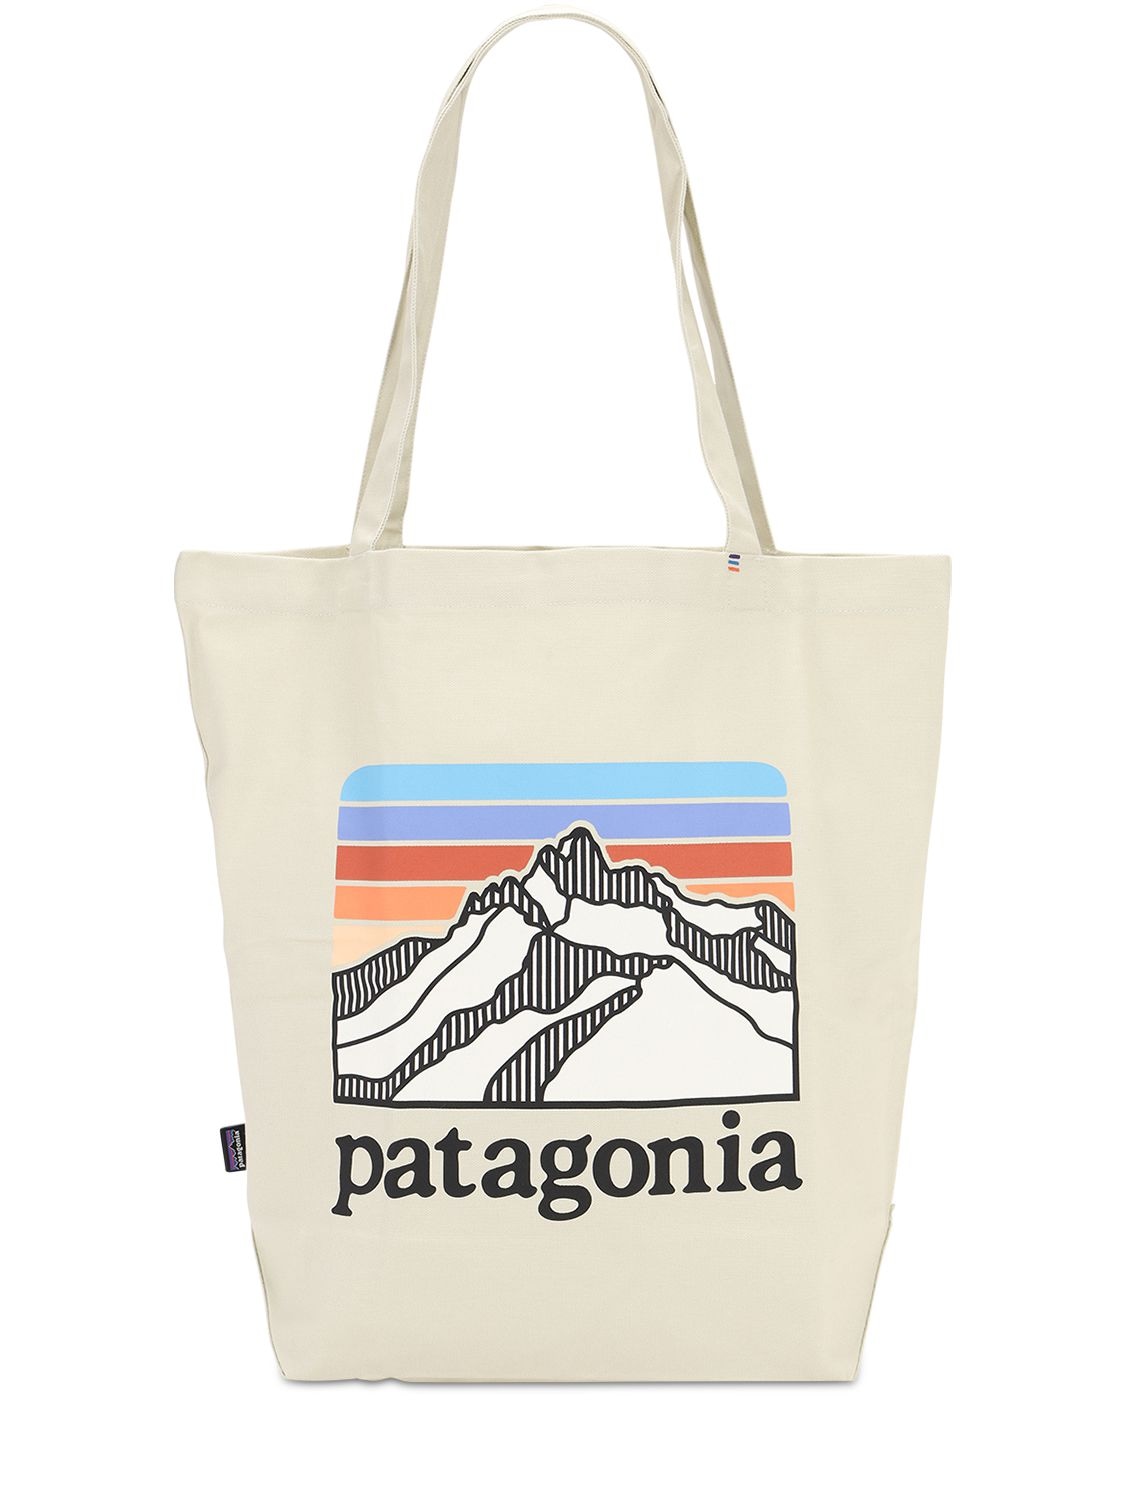 Patagonia Market Organic Cotton Tote Bag In Wollweiss